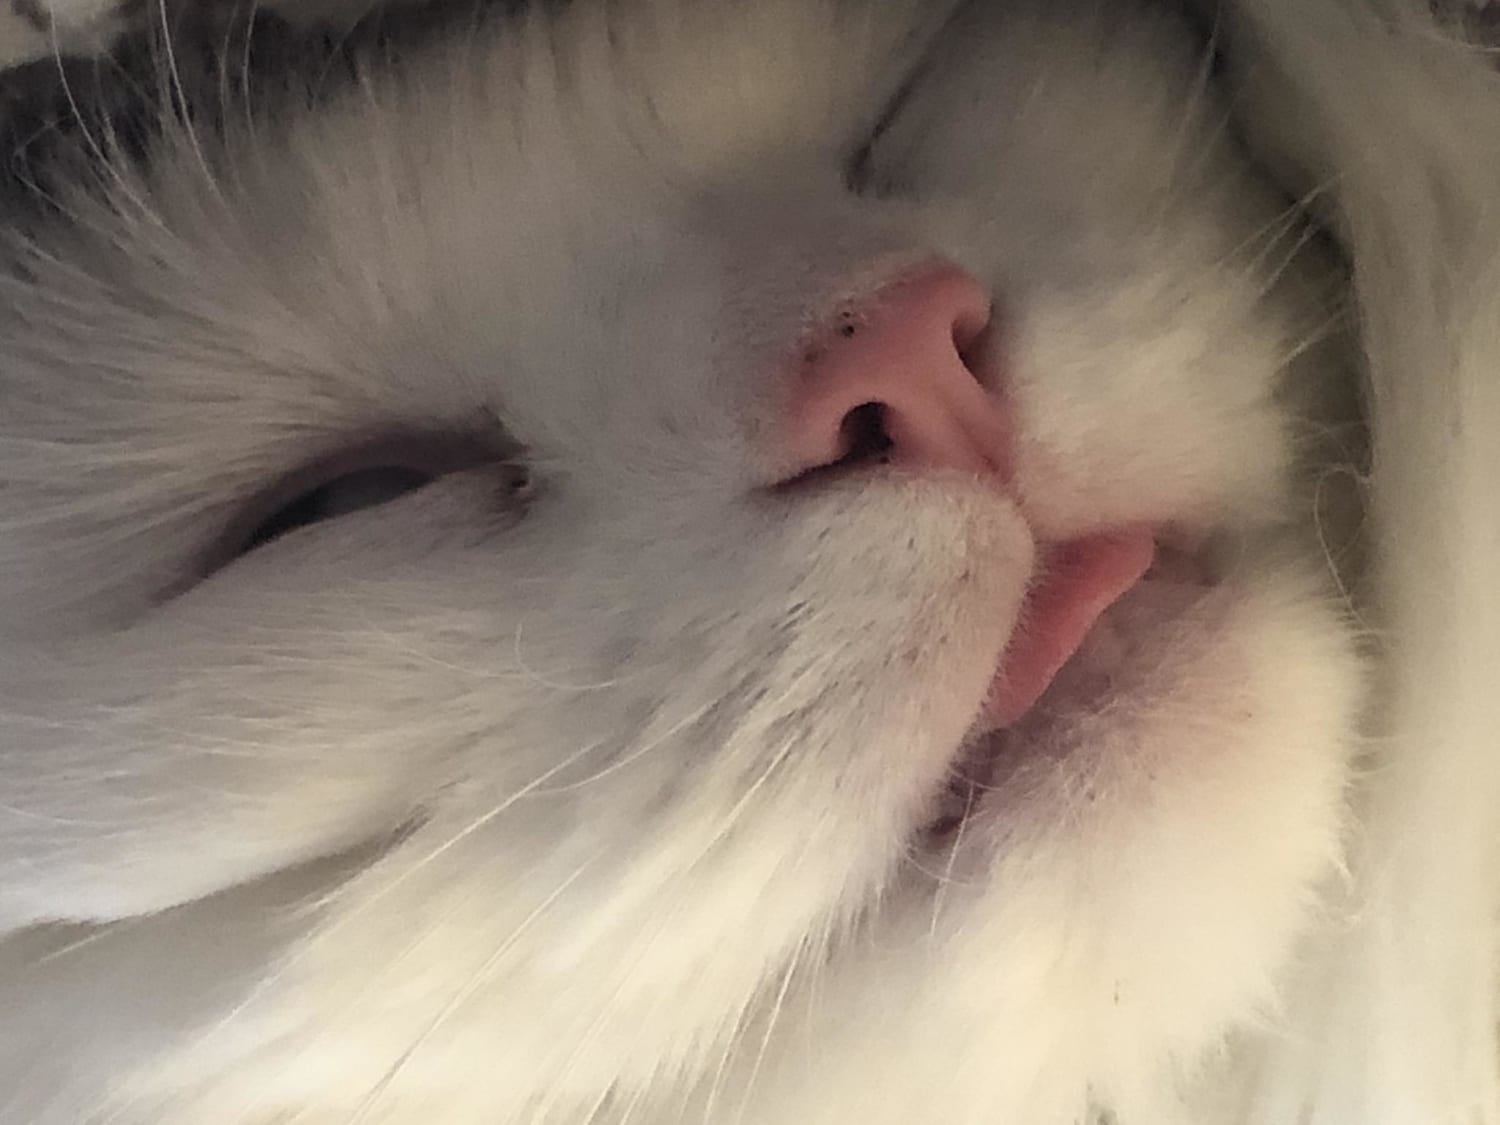 My favorite hobby is taking unflattering pics of my cat while she naps